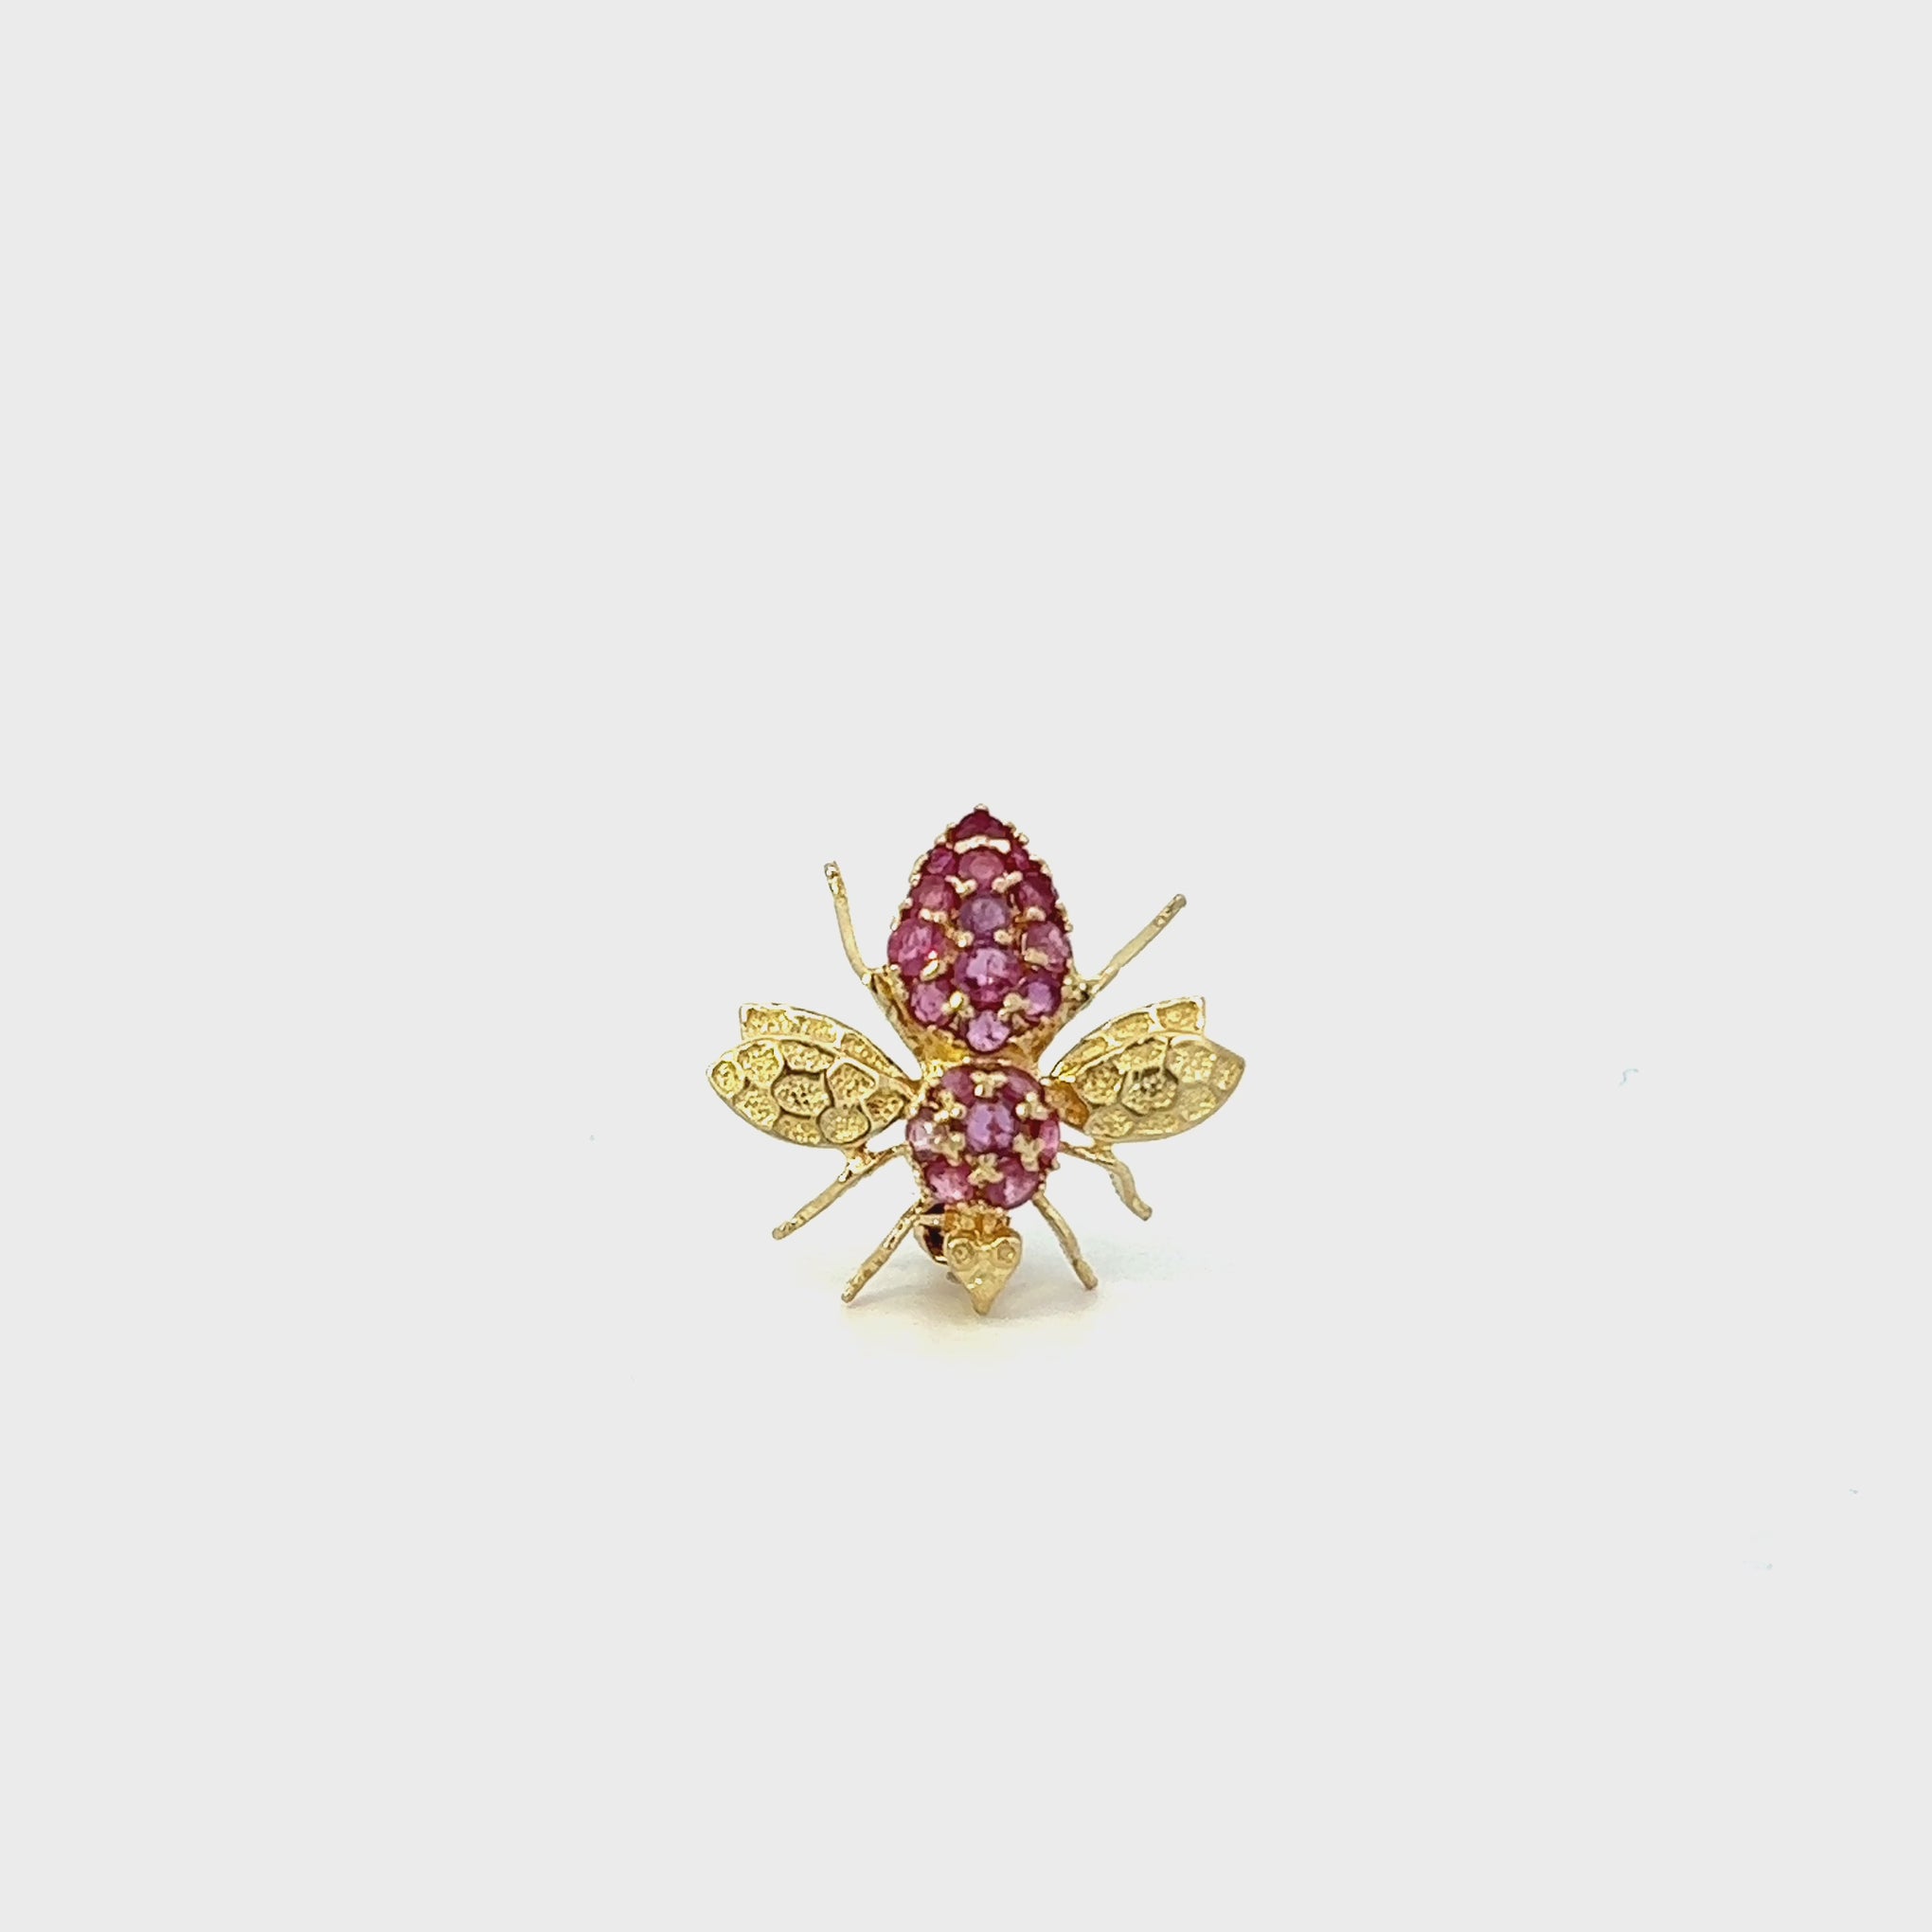 VINTAGE 18KT YELLOW GOLD AND RUBY BEE PIN.